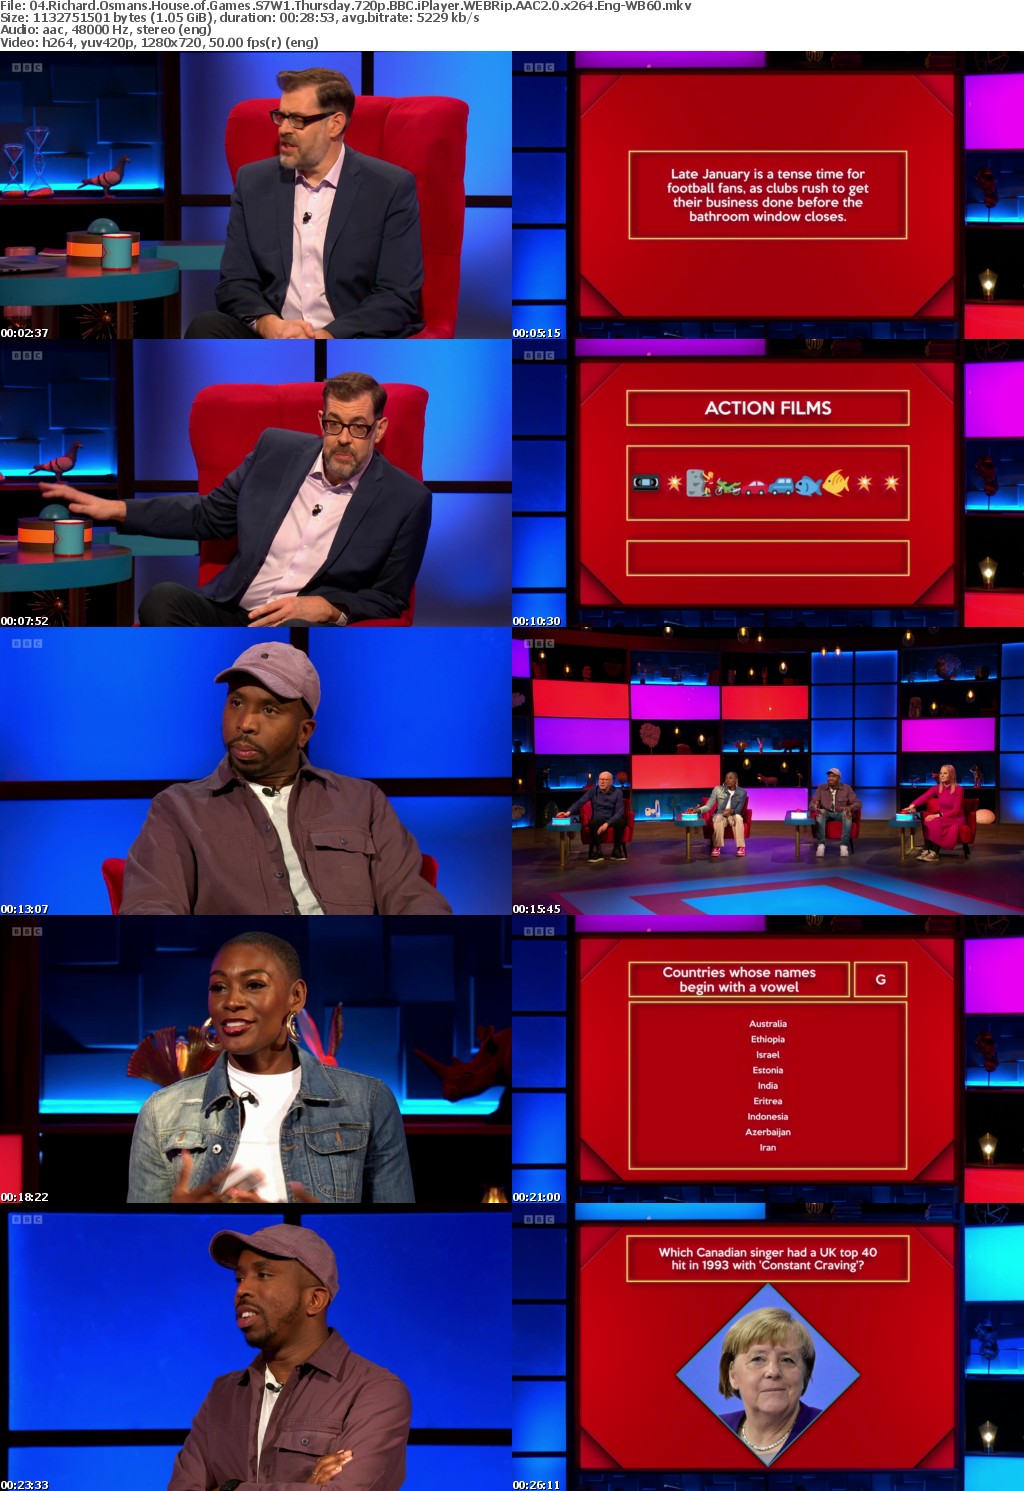 Richard Osmans House of Games S7W1 COMPLETE 1080i MiXED BBCTwo IPTV DD2 0 x264 Eng-WB60